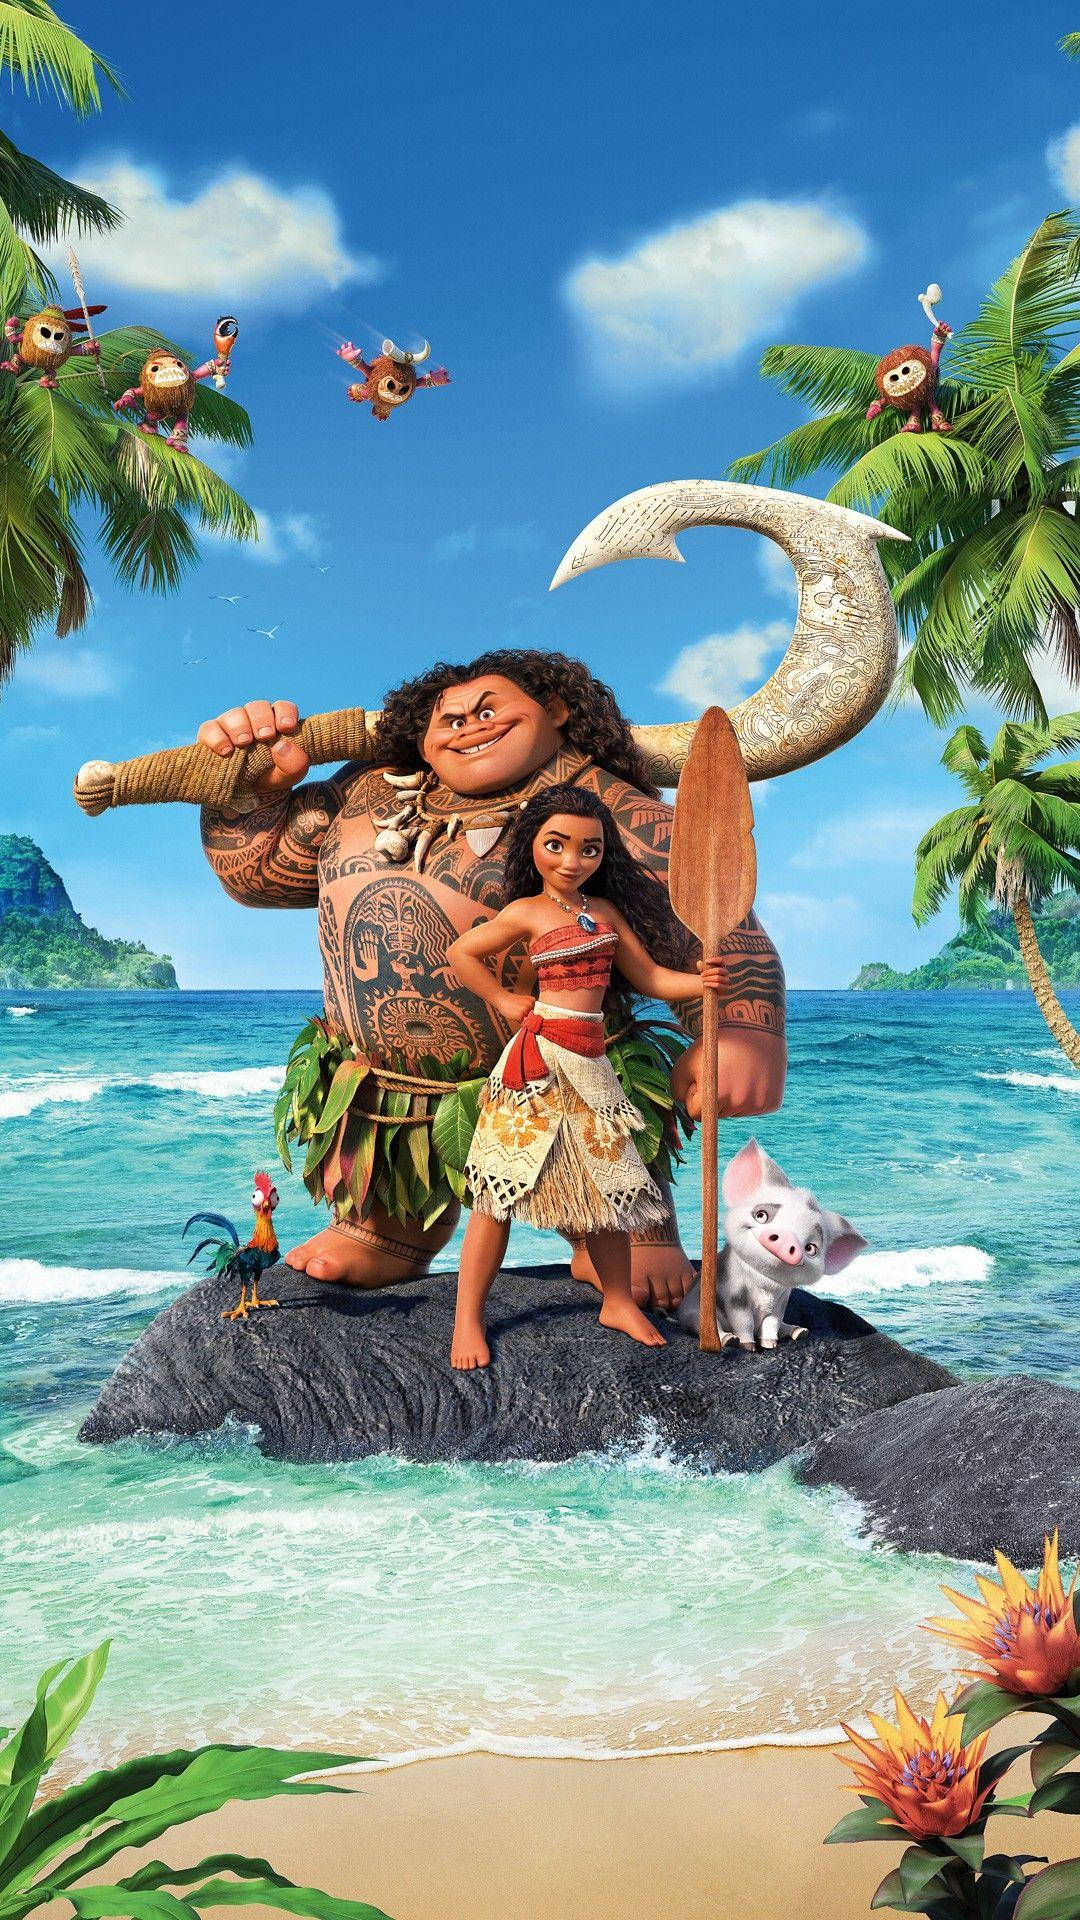 Astounding 8k Display Of The Moana Movie Poster On An Iphone Background